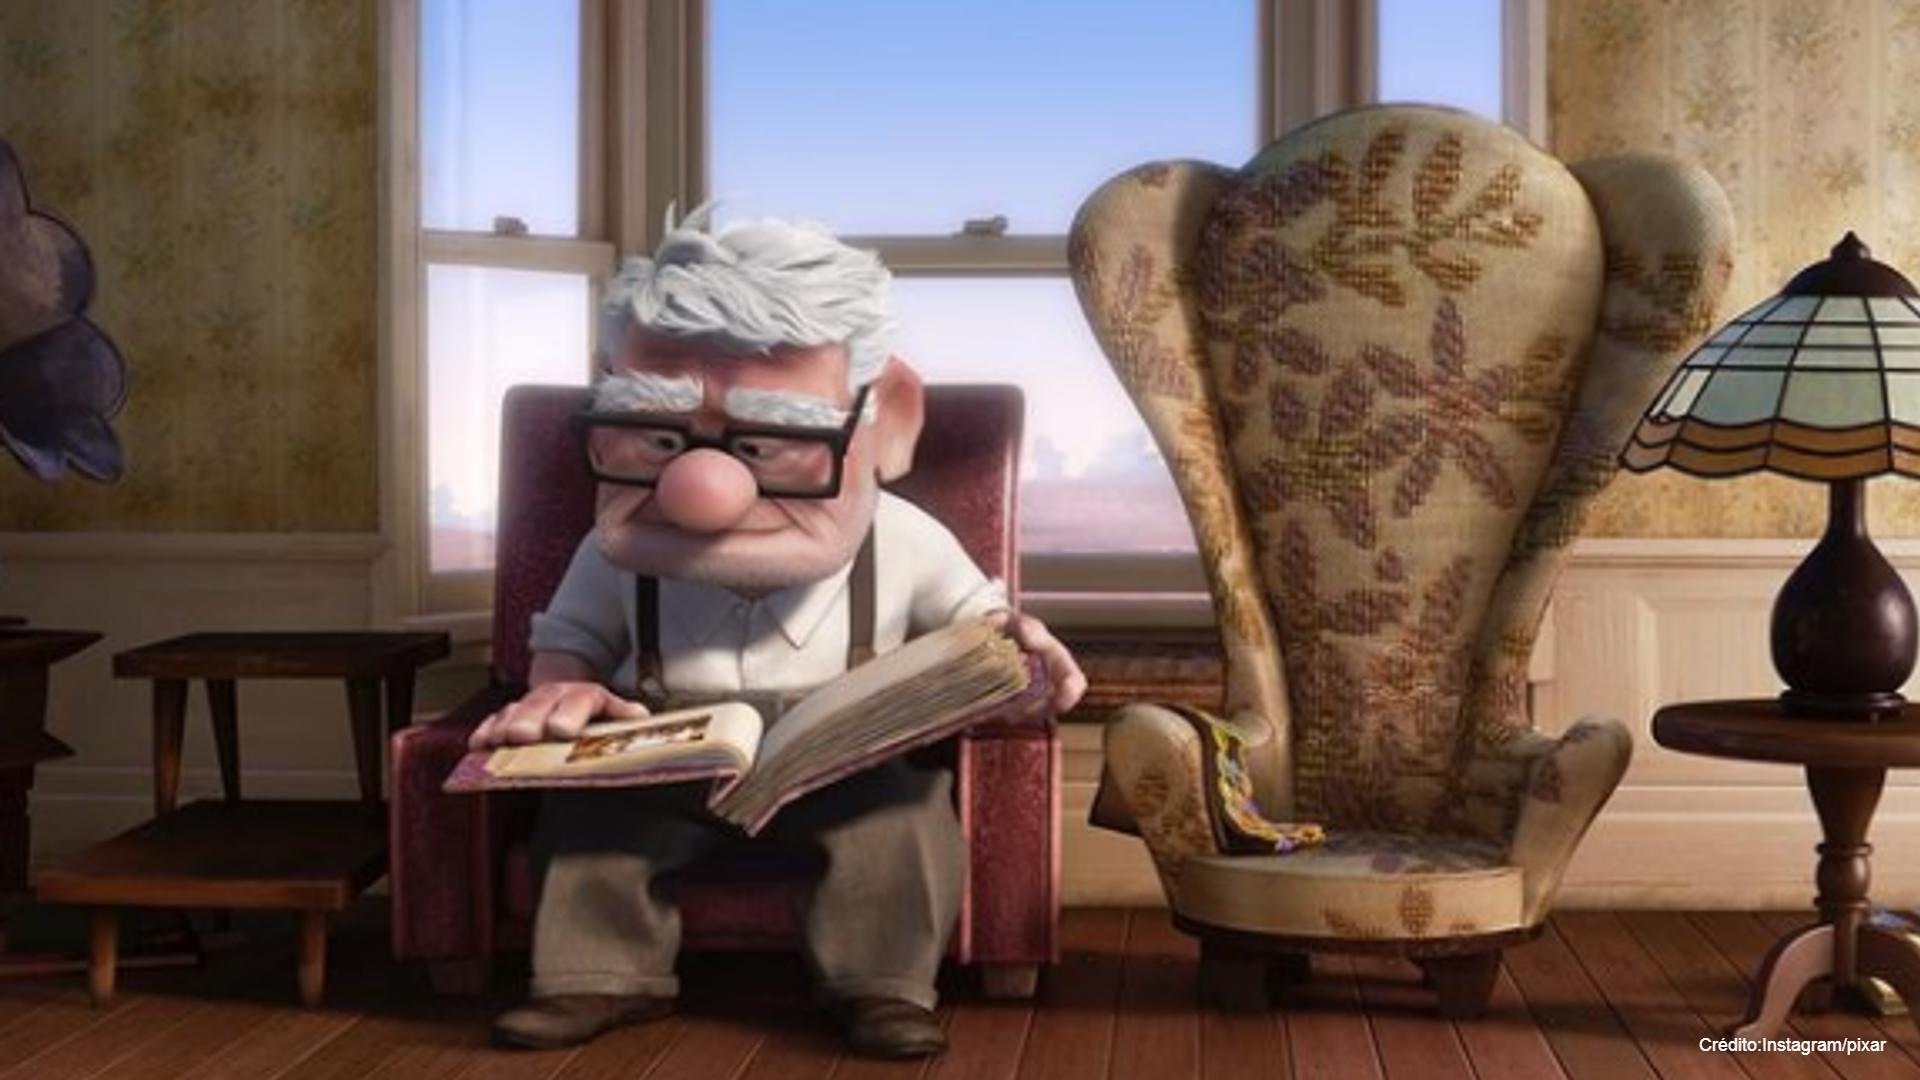 Let's remember when Pixar fulfilled a girl's wish to see 'Up' before she died